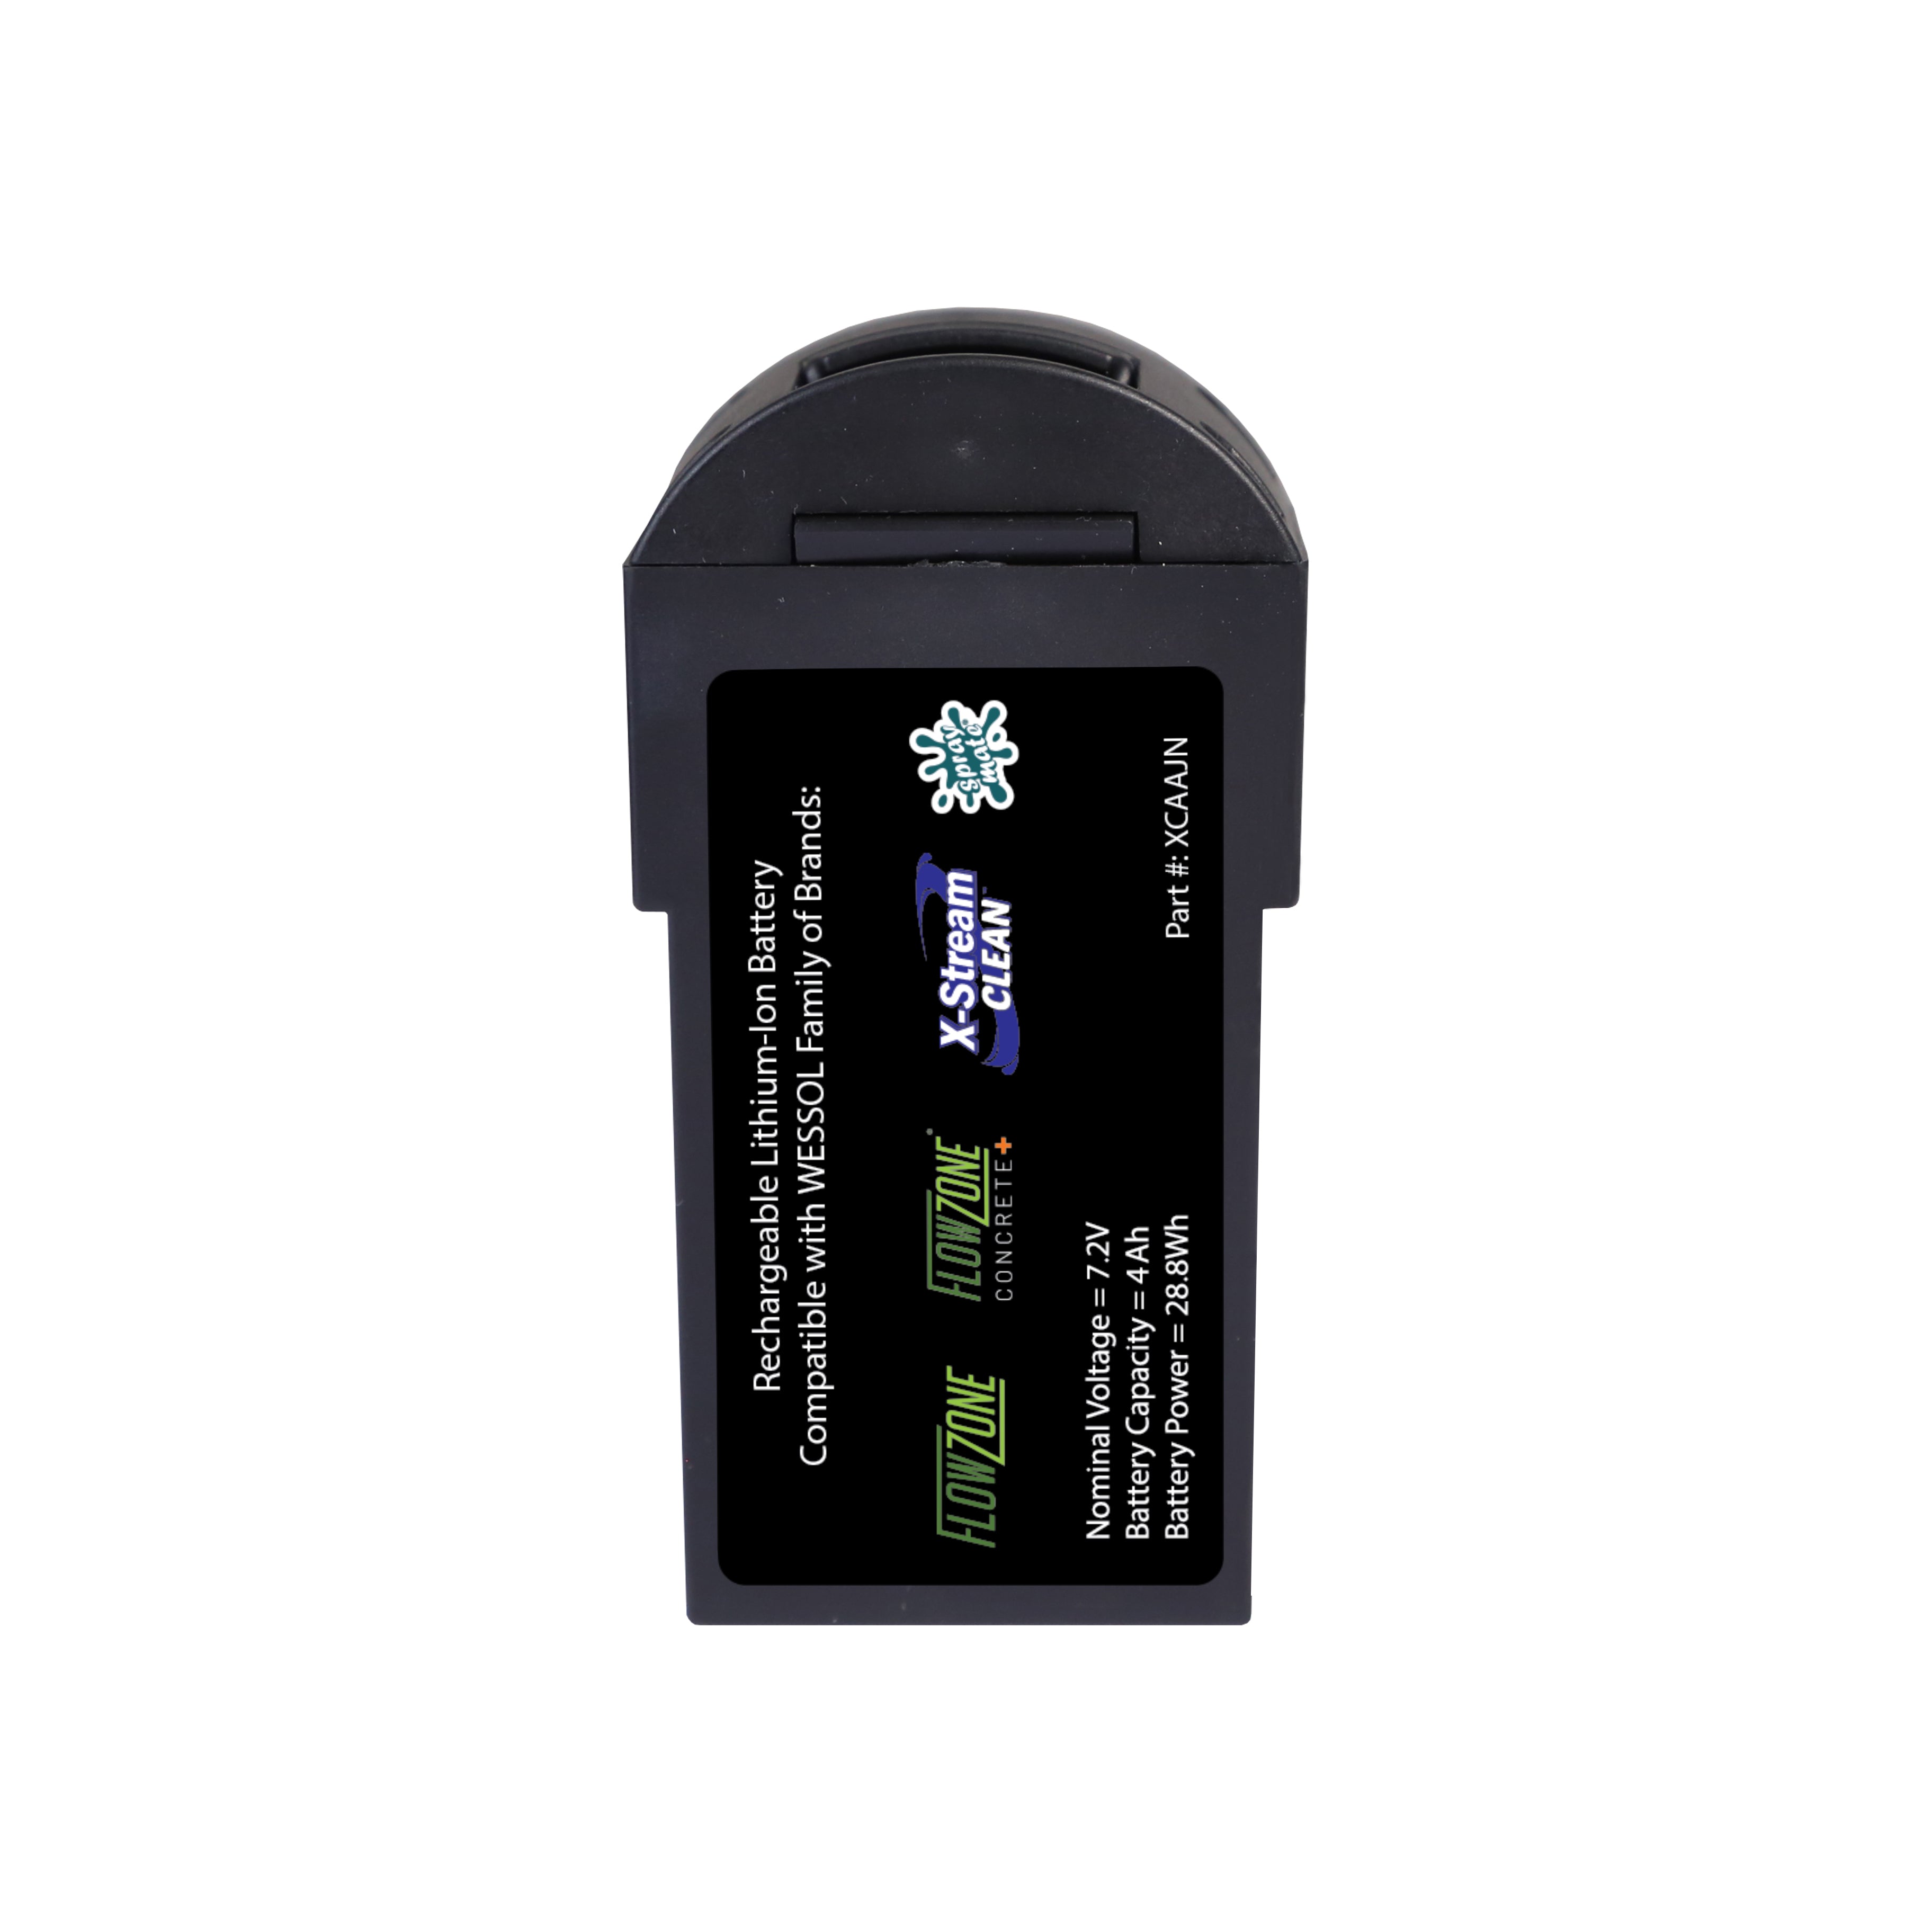 7.2V / 4.0Ah Lithium-Ion Battery Pack